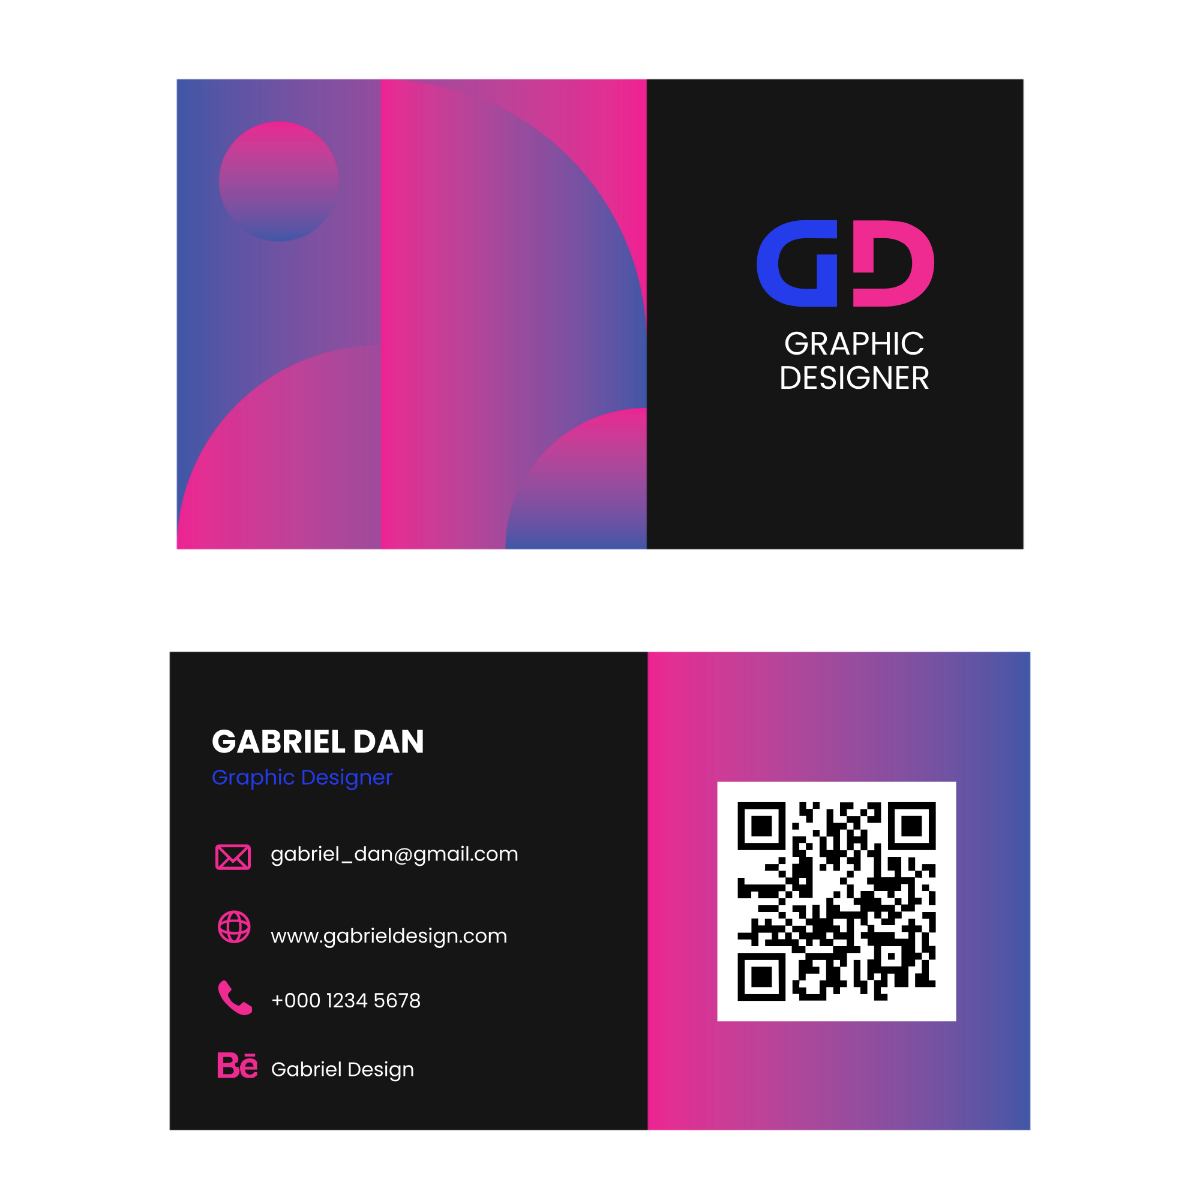 Graphic Designer Business Card Vector Template